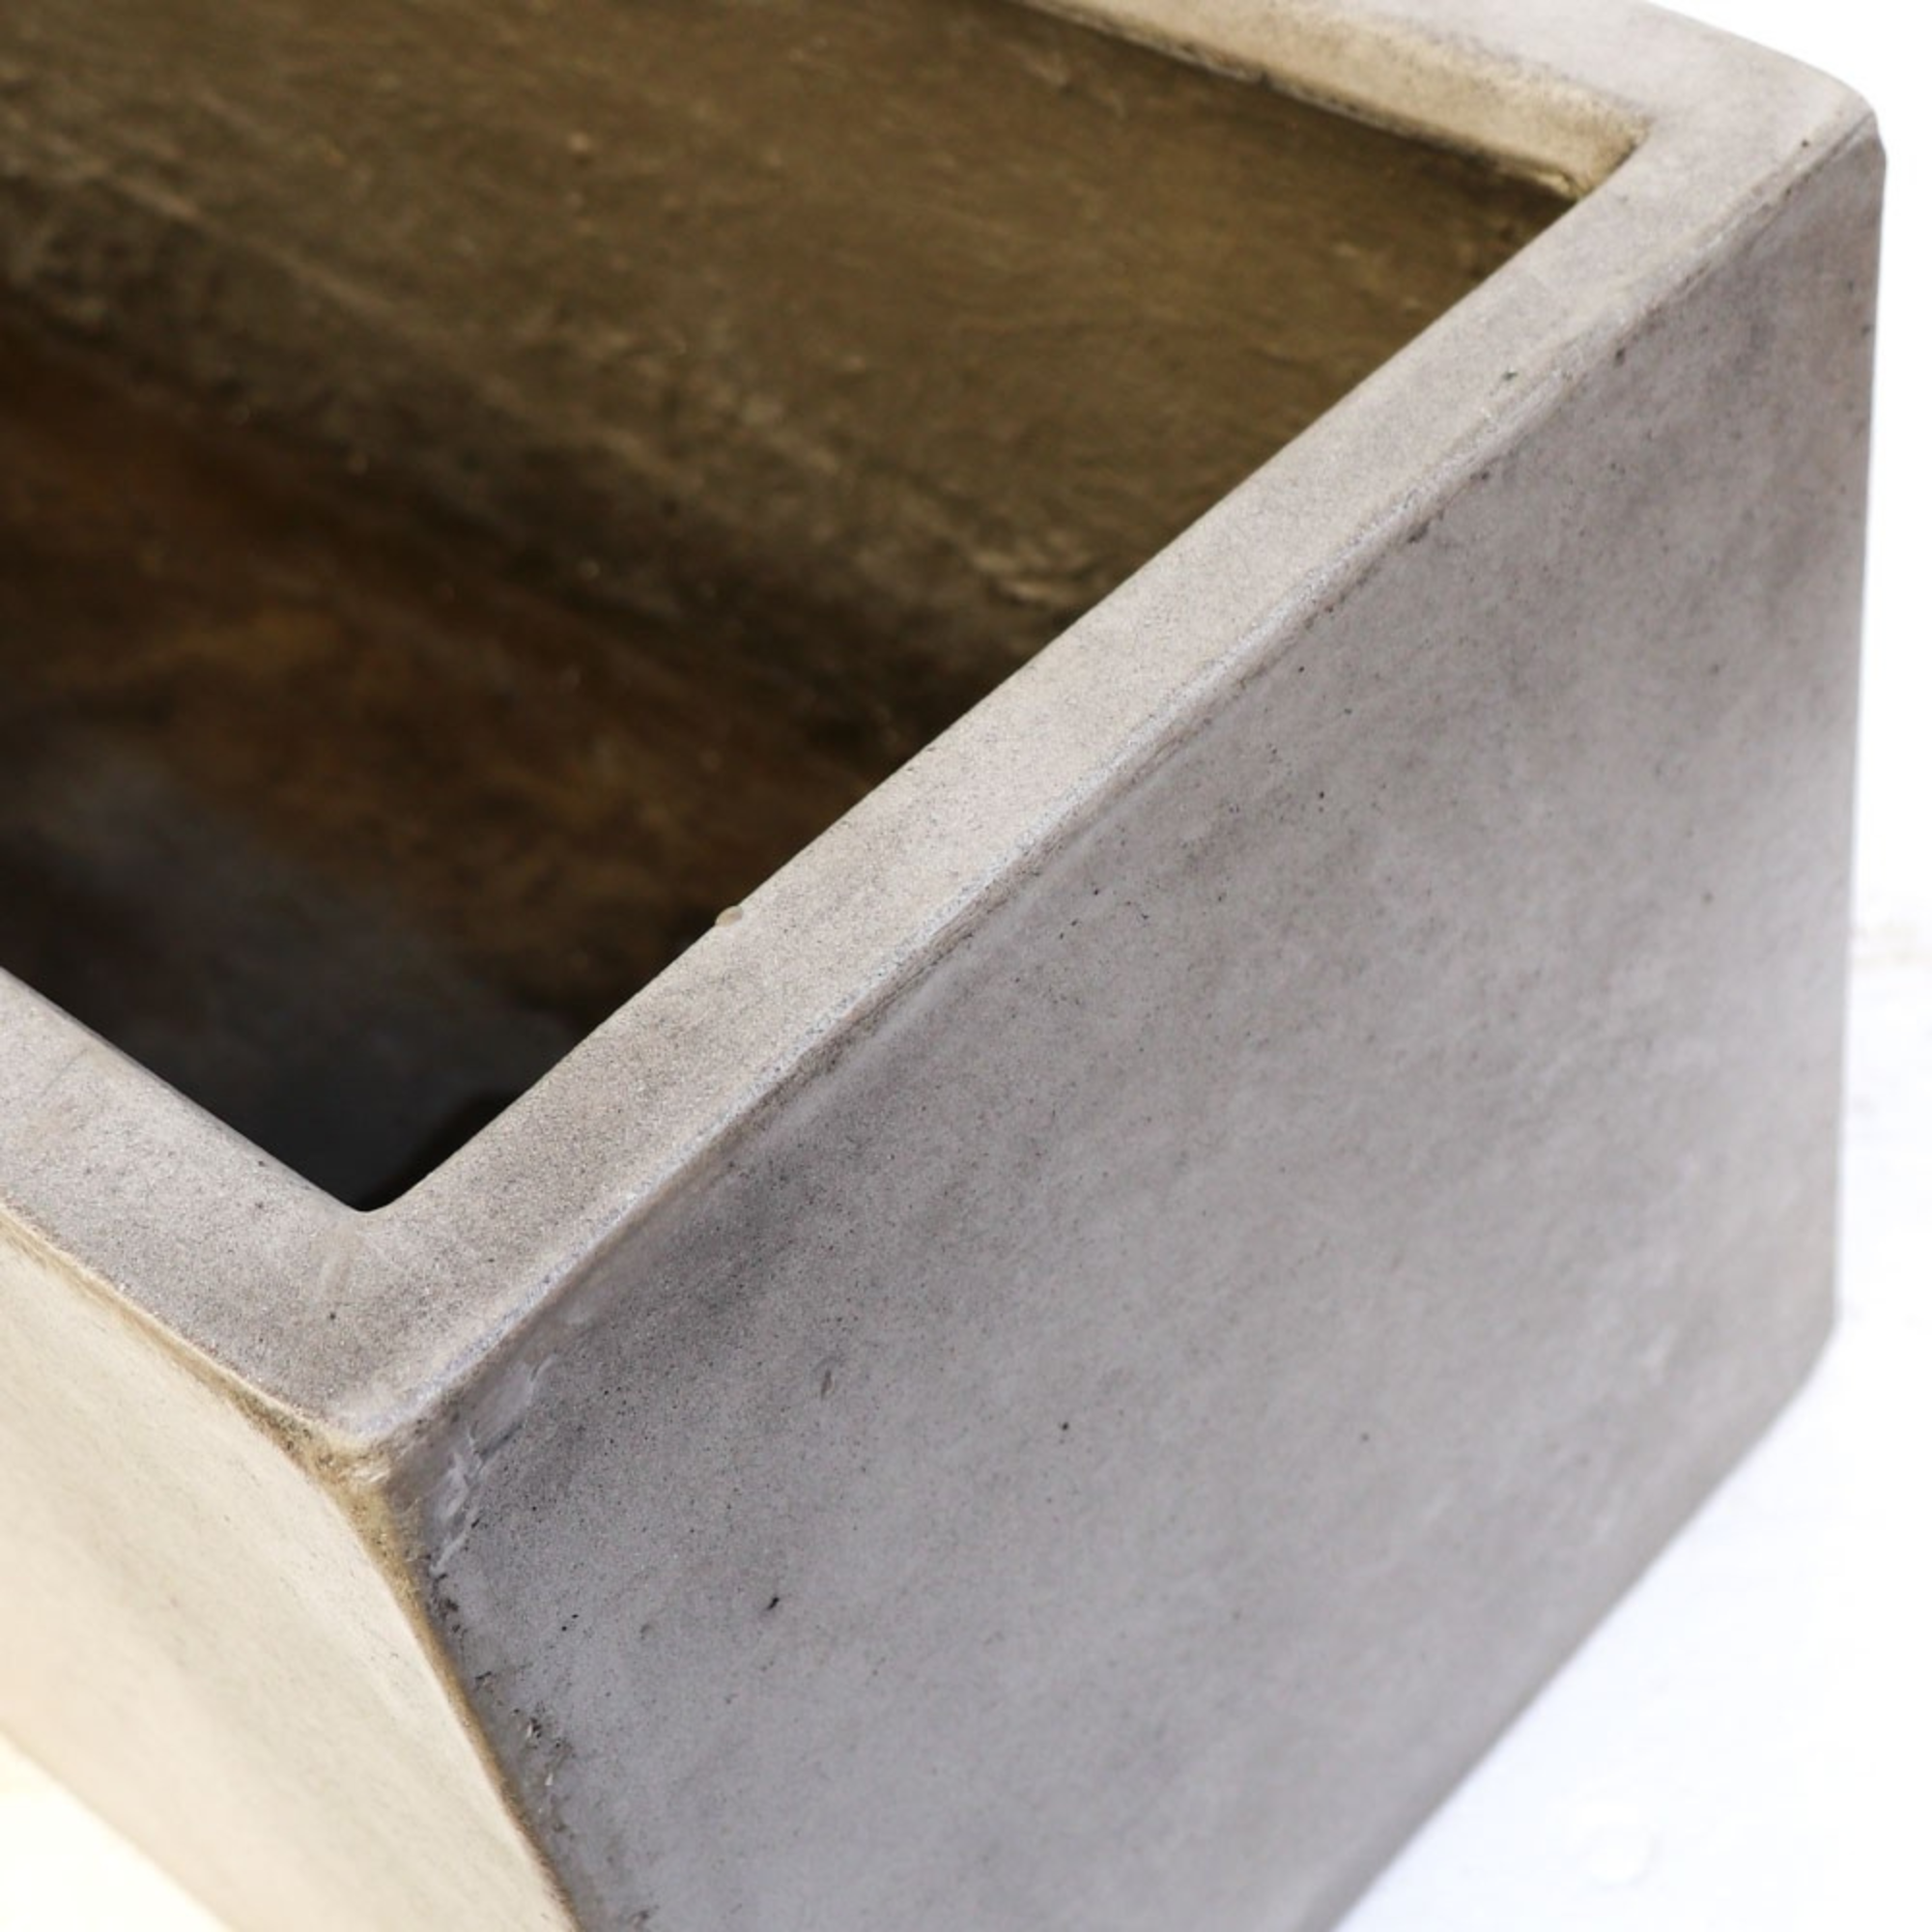 WAIHOU RECTANGLE PLANTER | 3 SIZES | BLACK, WHITE or WEATHERED CEMENT